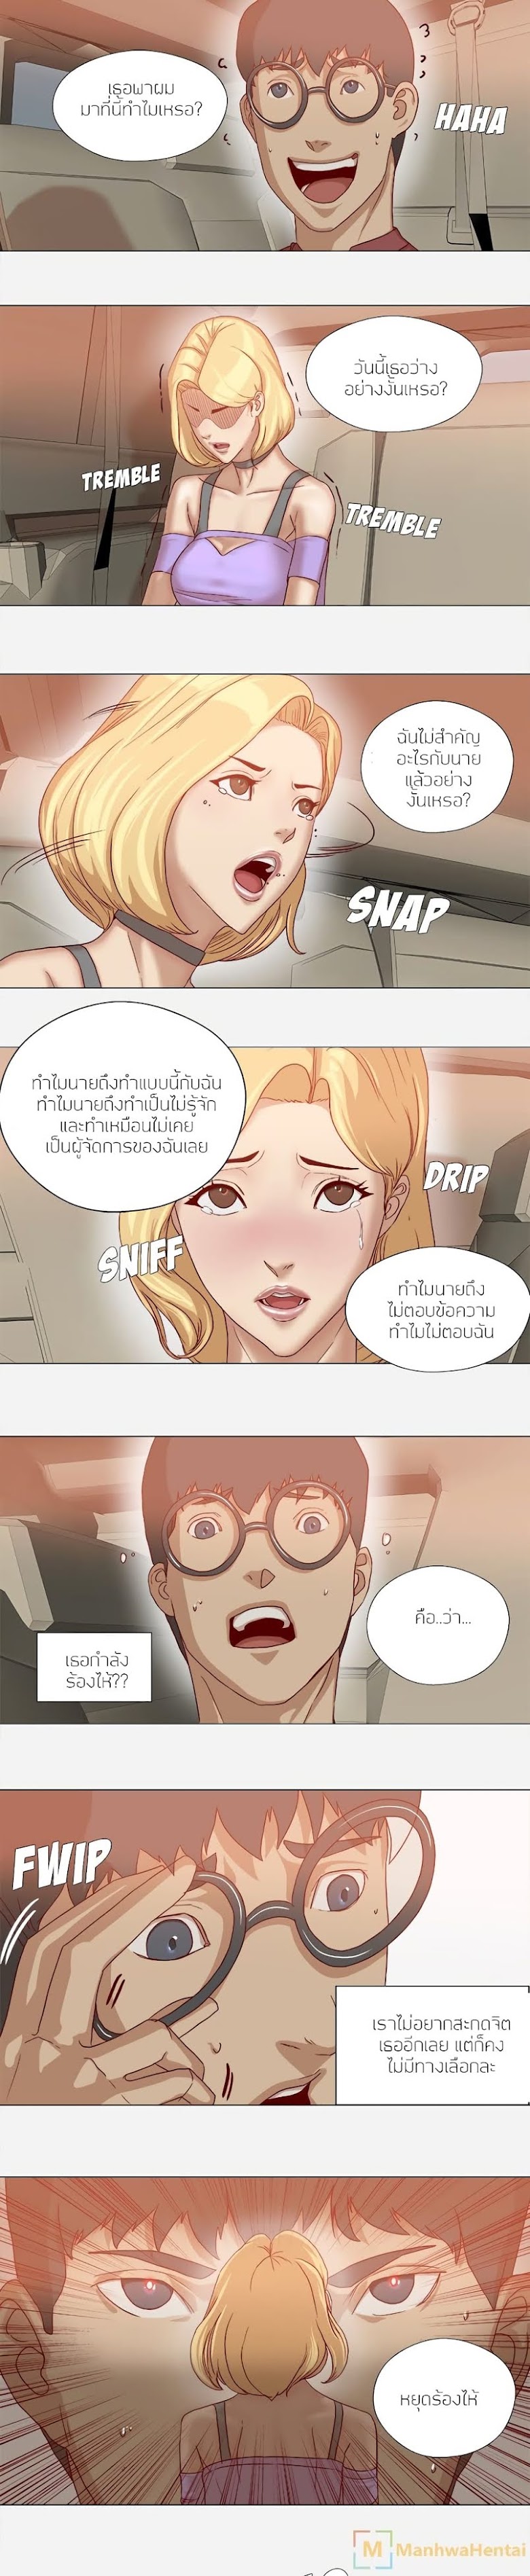 The Good Manager - หน้า 8